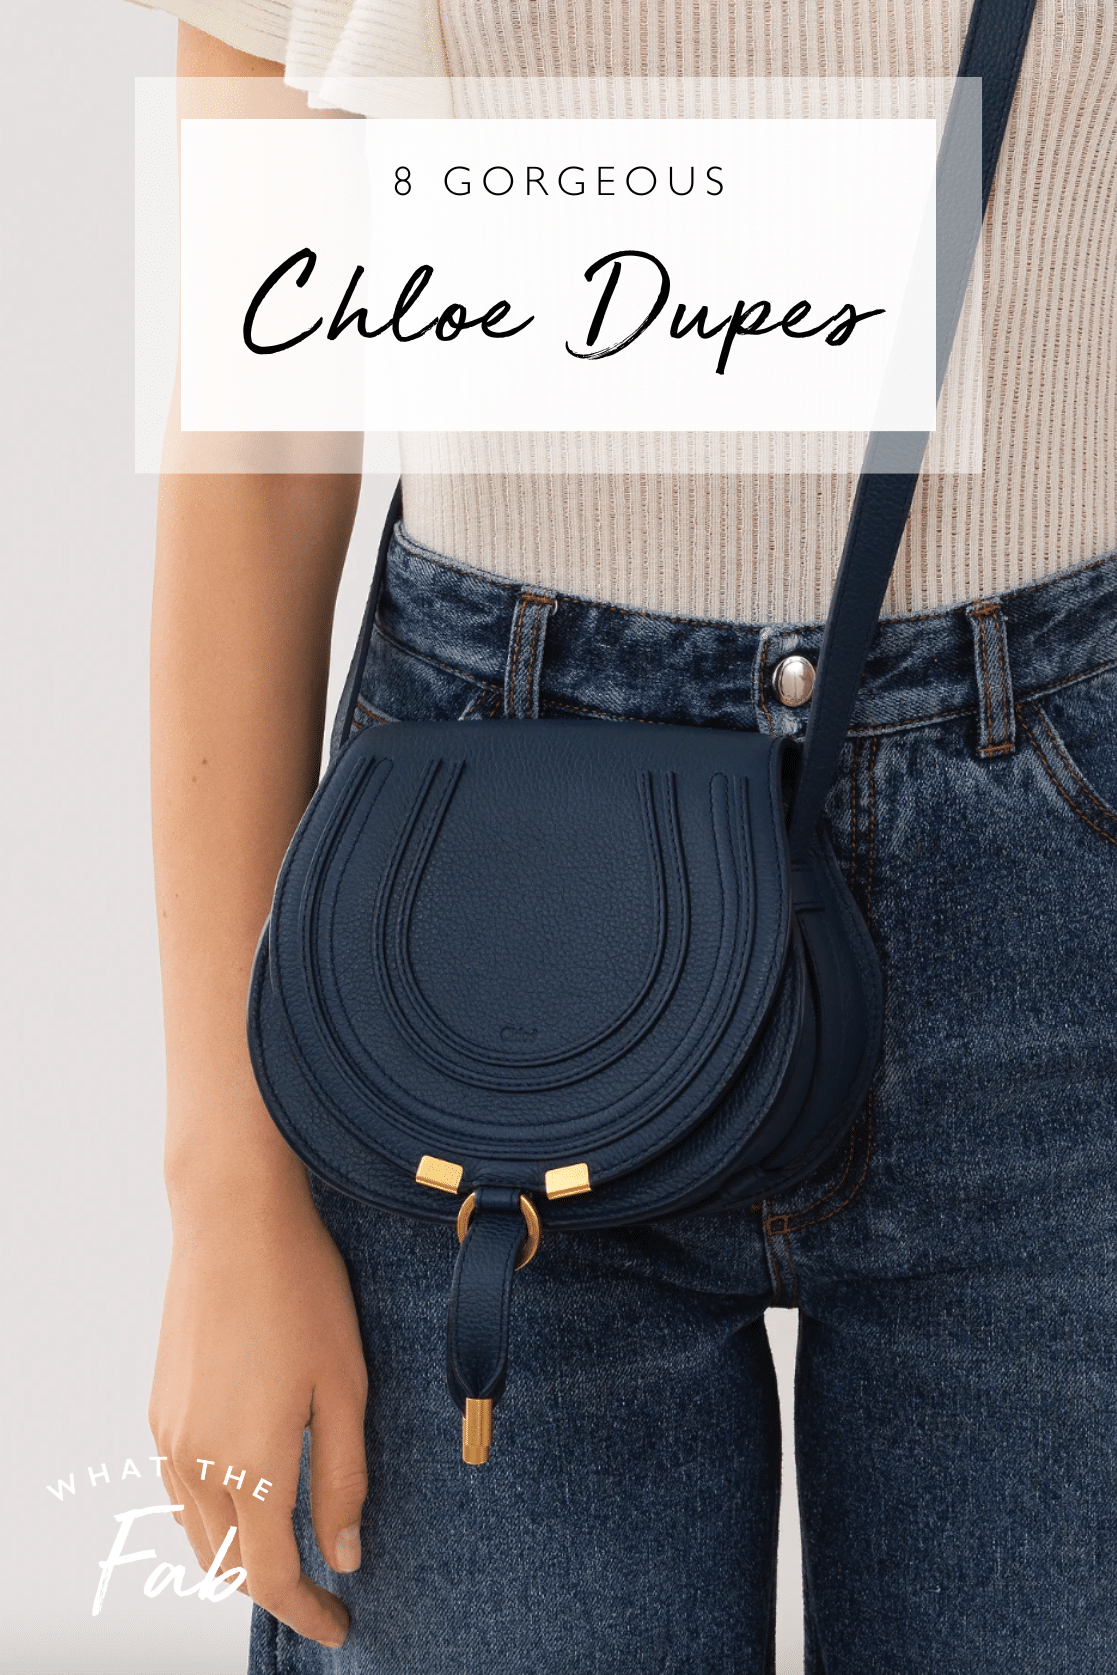 Best Chloe dupes, by fashion blogger What The Fab